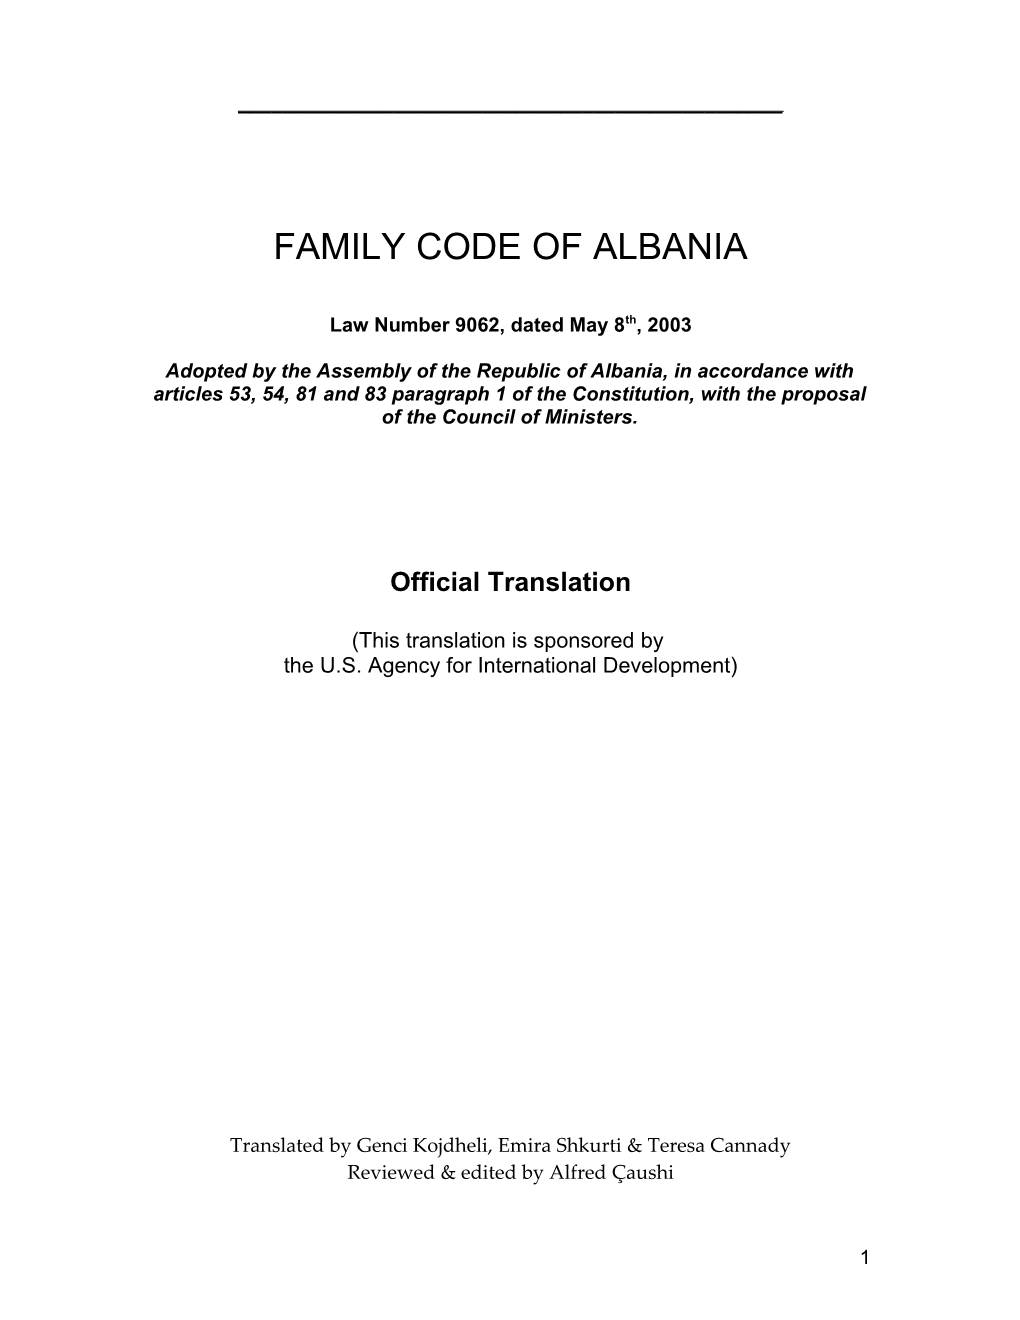 Law Number 9062, Dated May 8Th, 2003